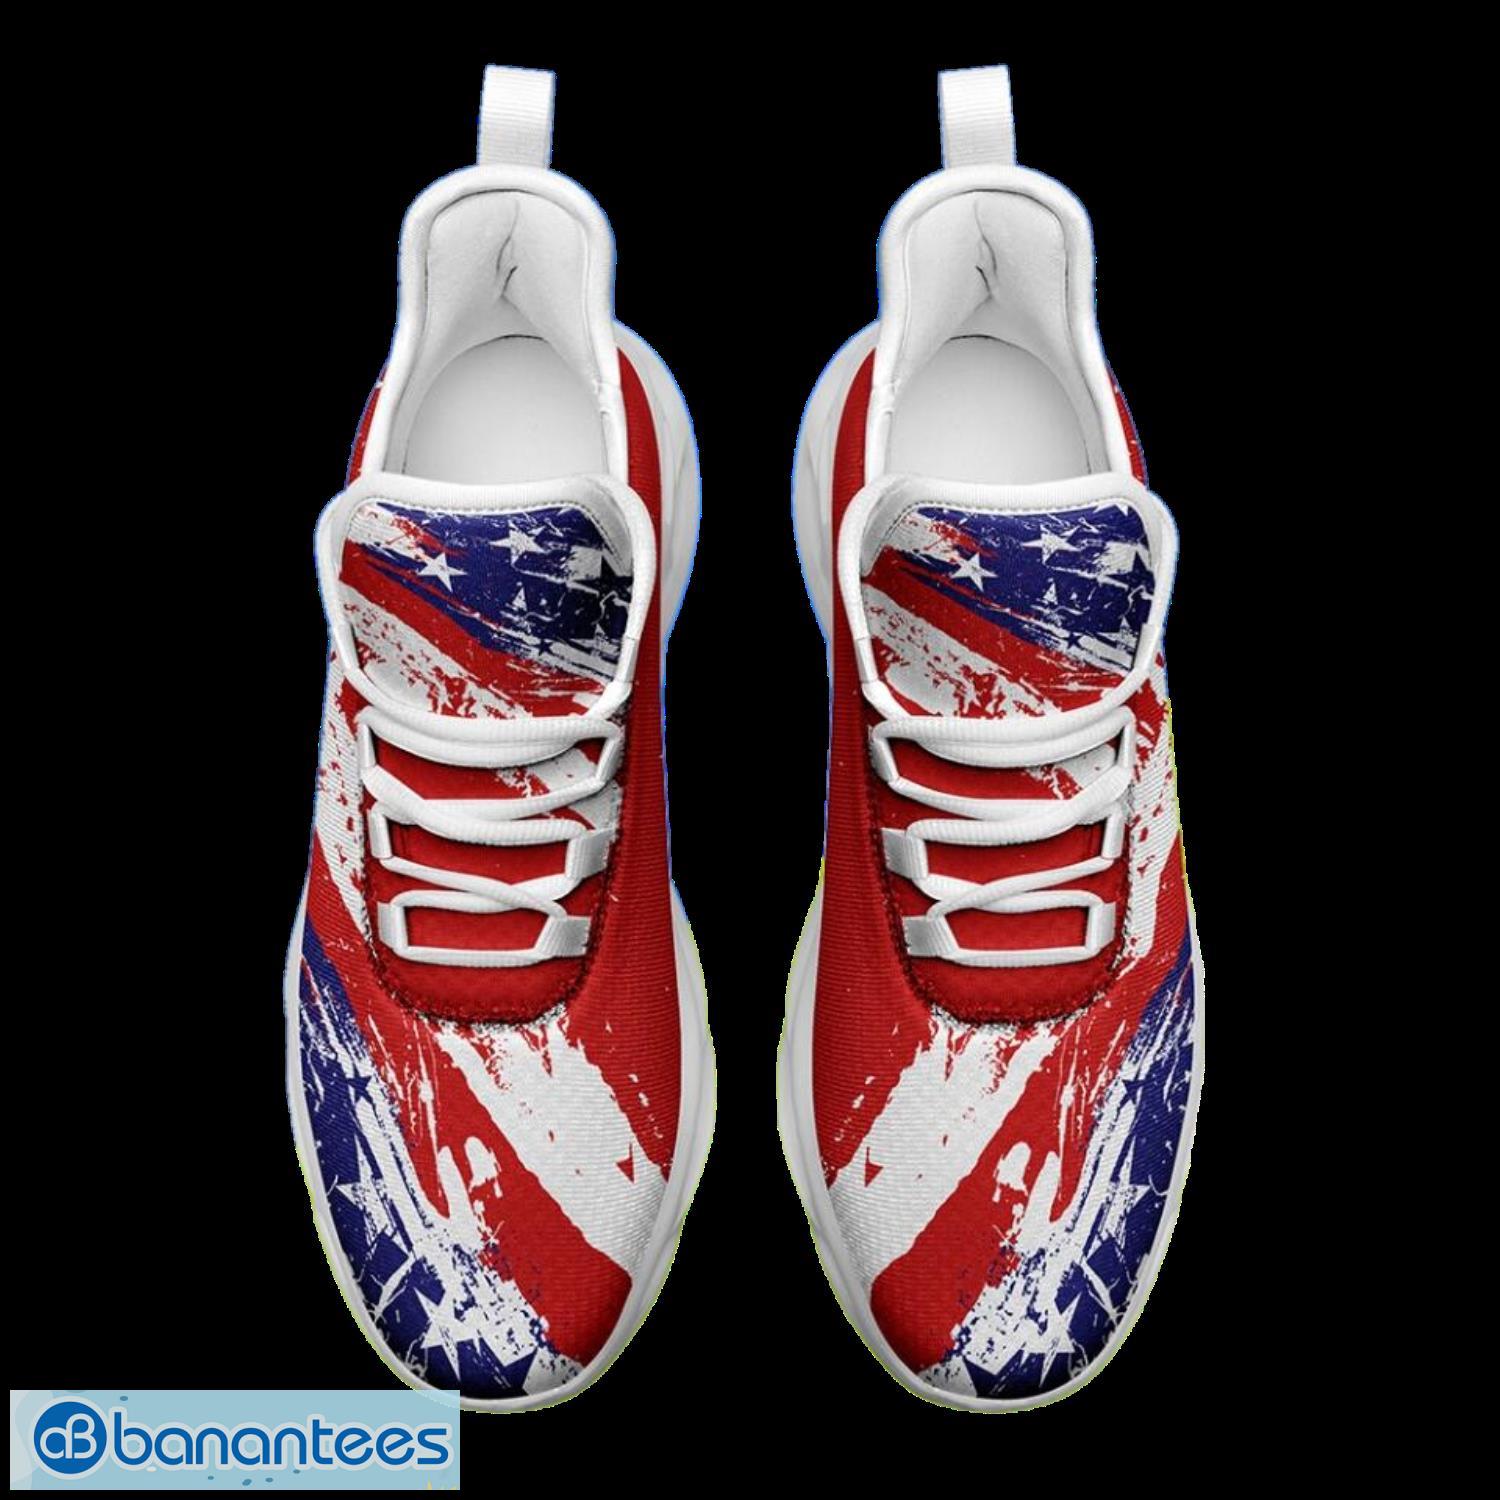 American Airlines Clunky Sneaker Shoes Max Soul Shoes Personalized Name